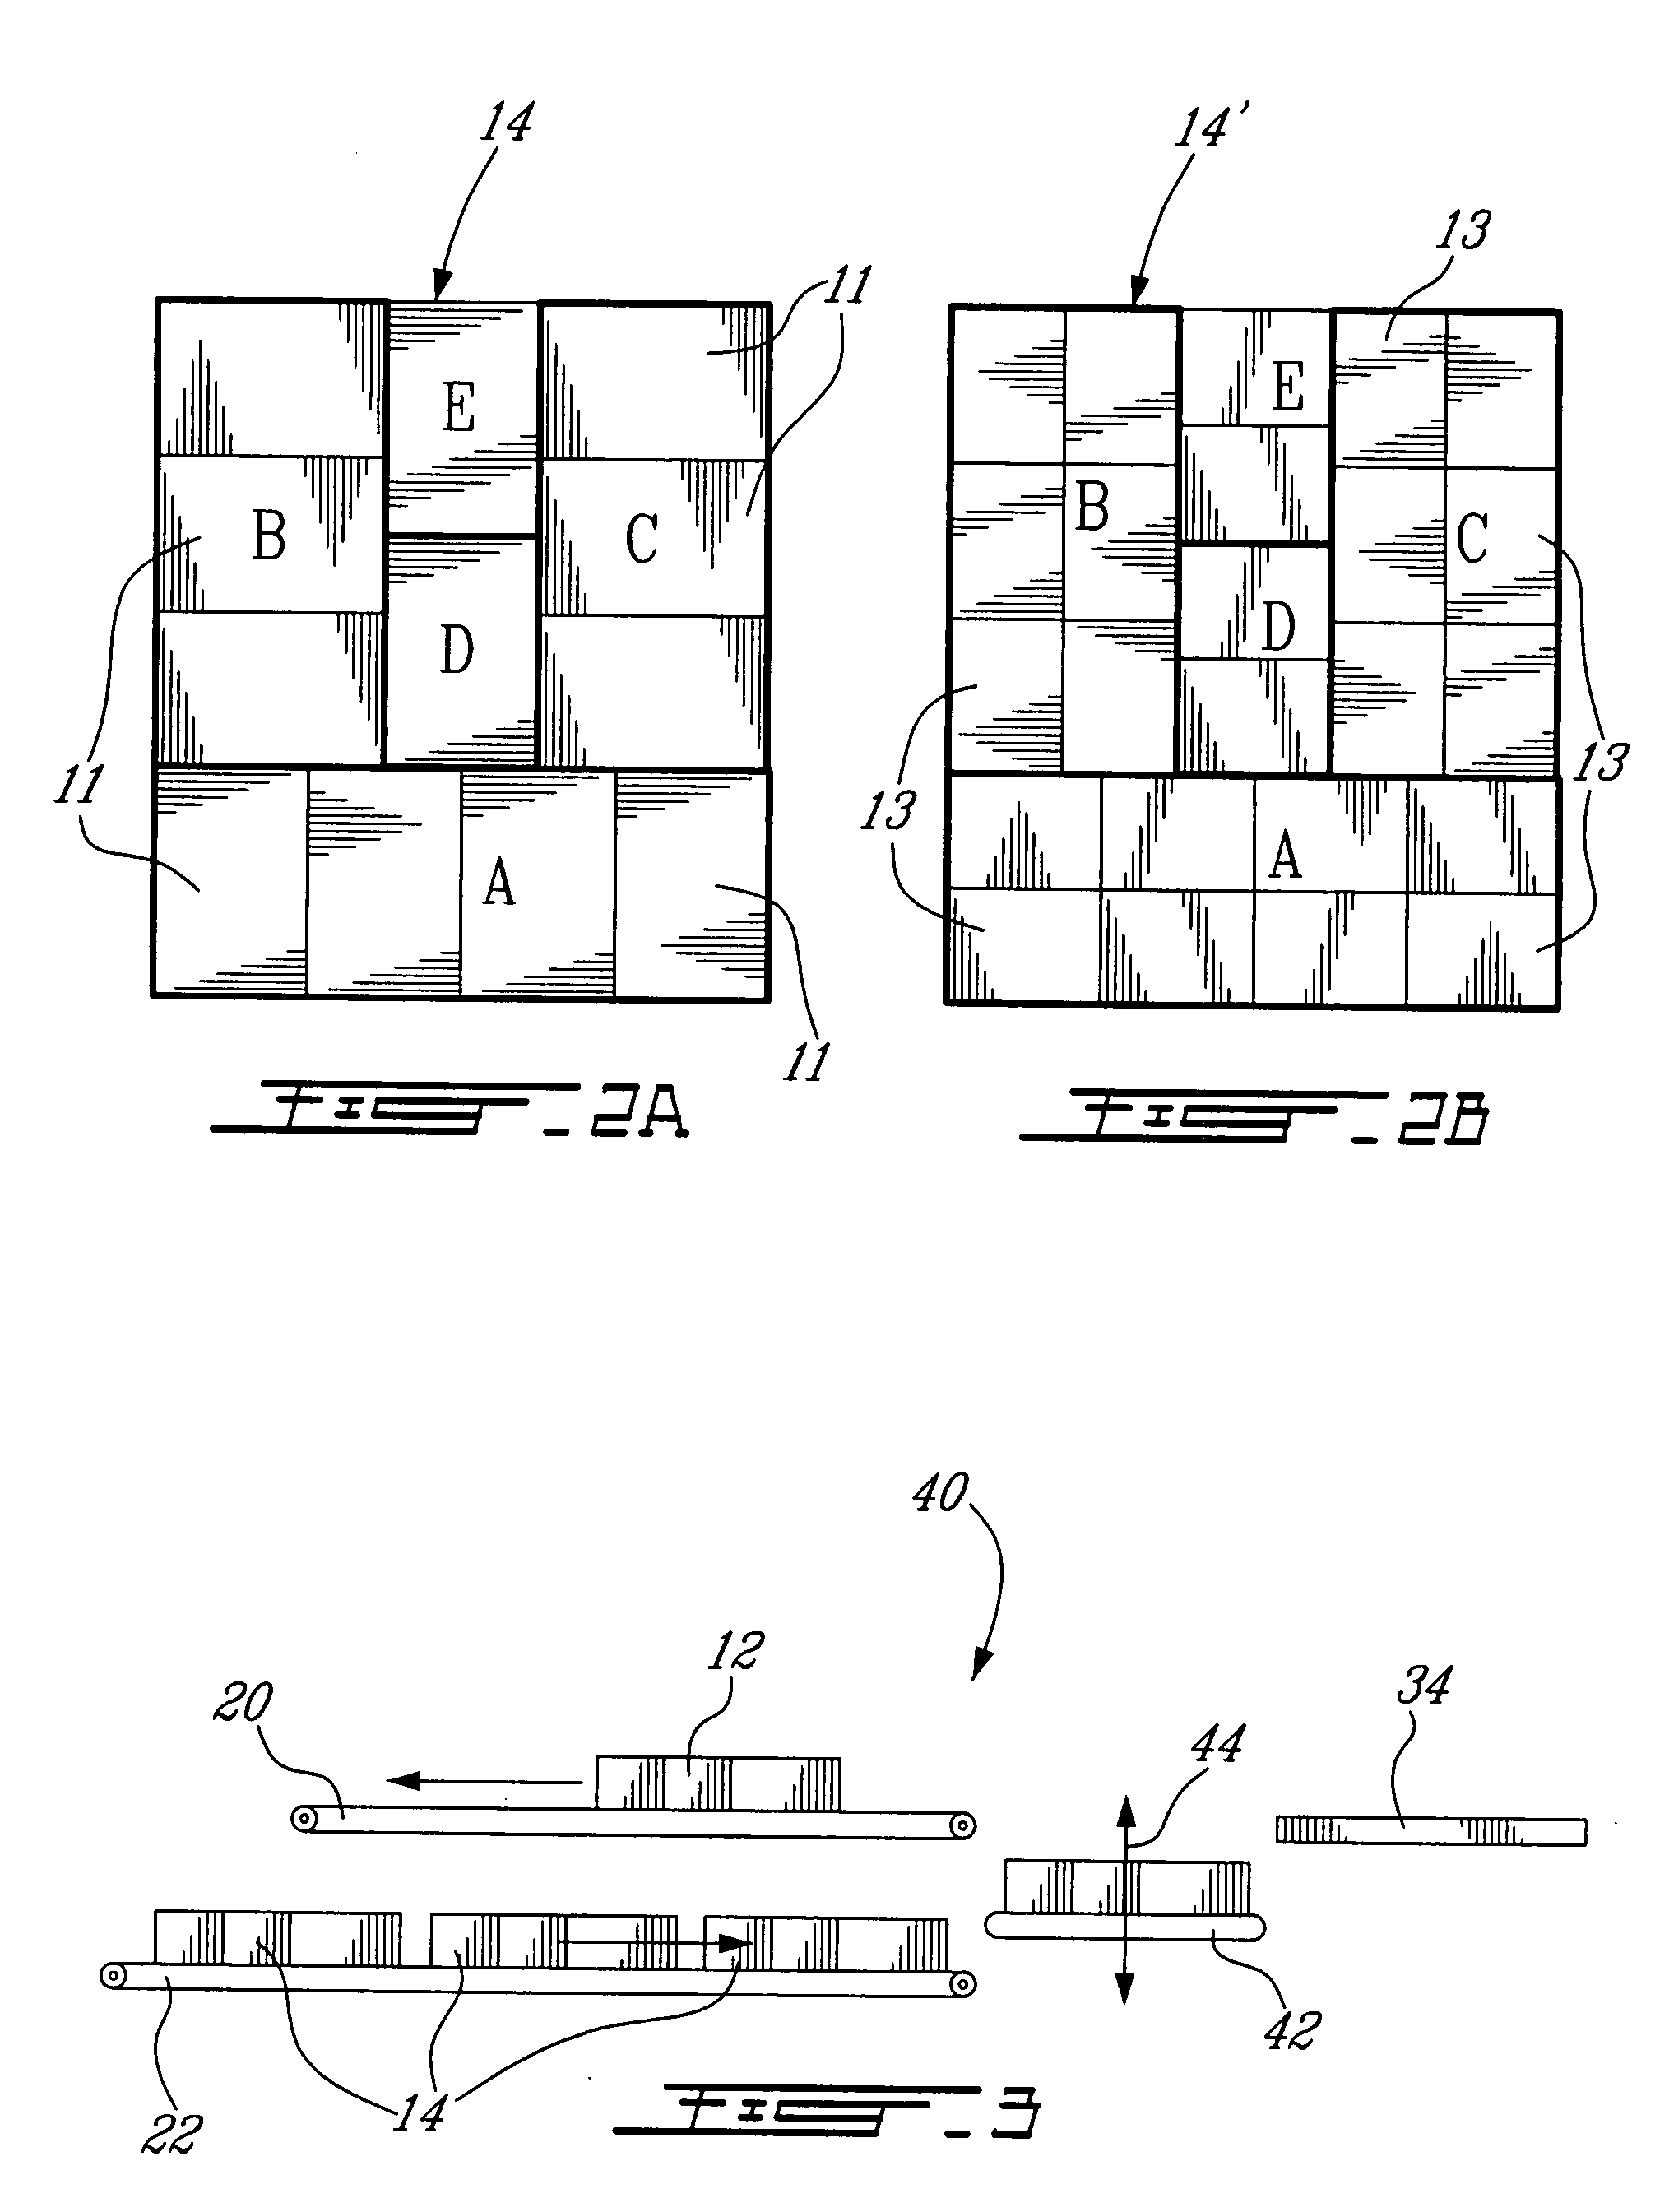 System and method to build mixed pallet layers from full pallet layers